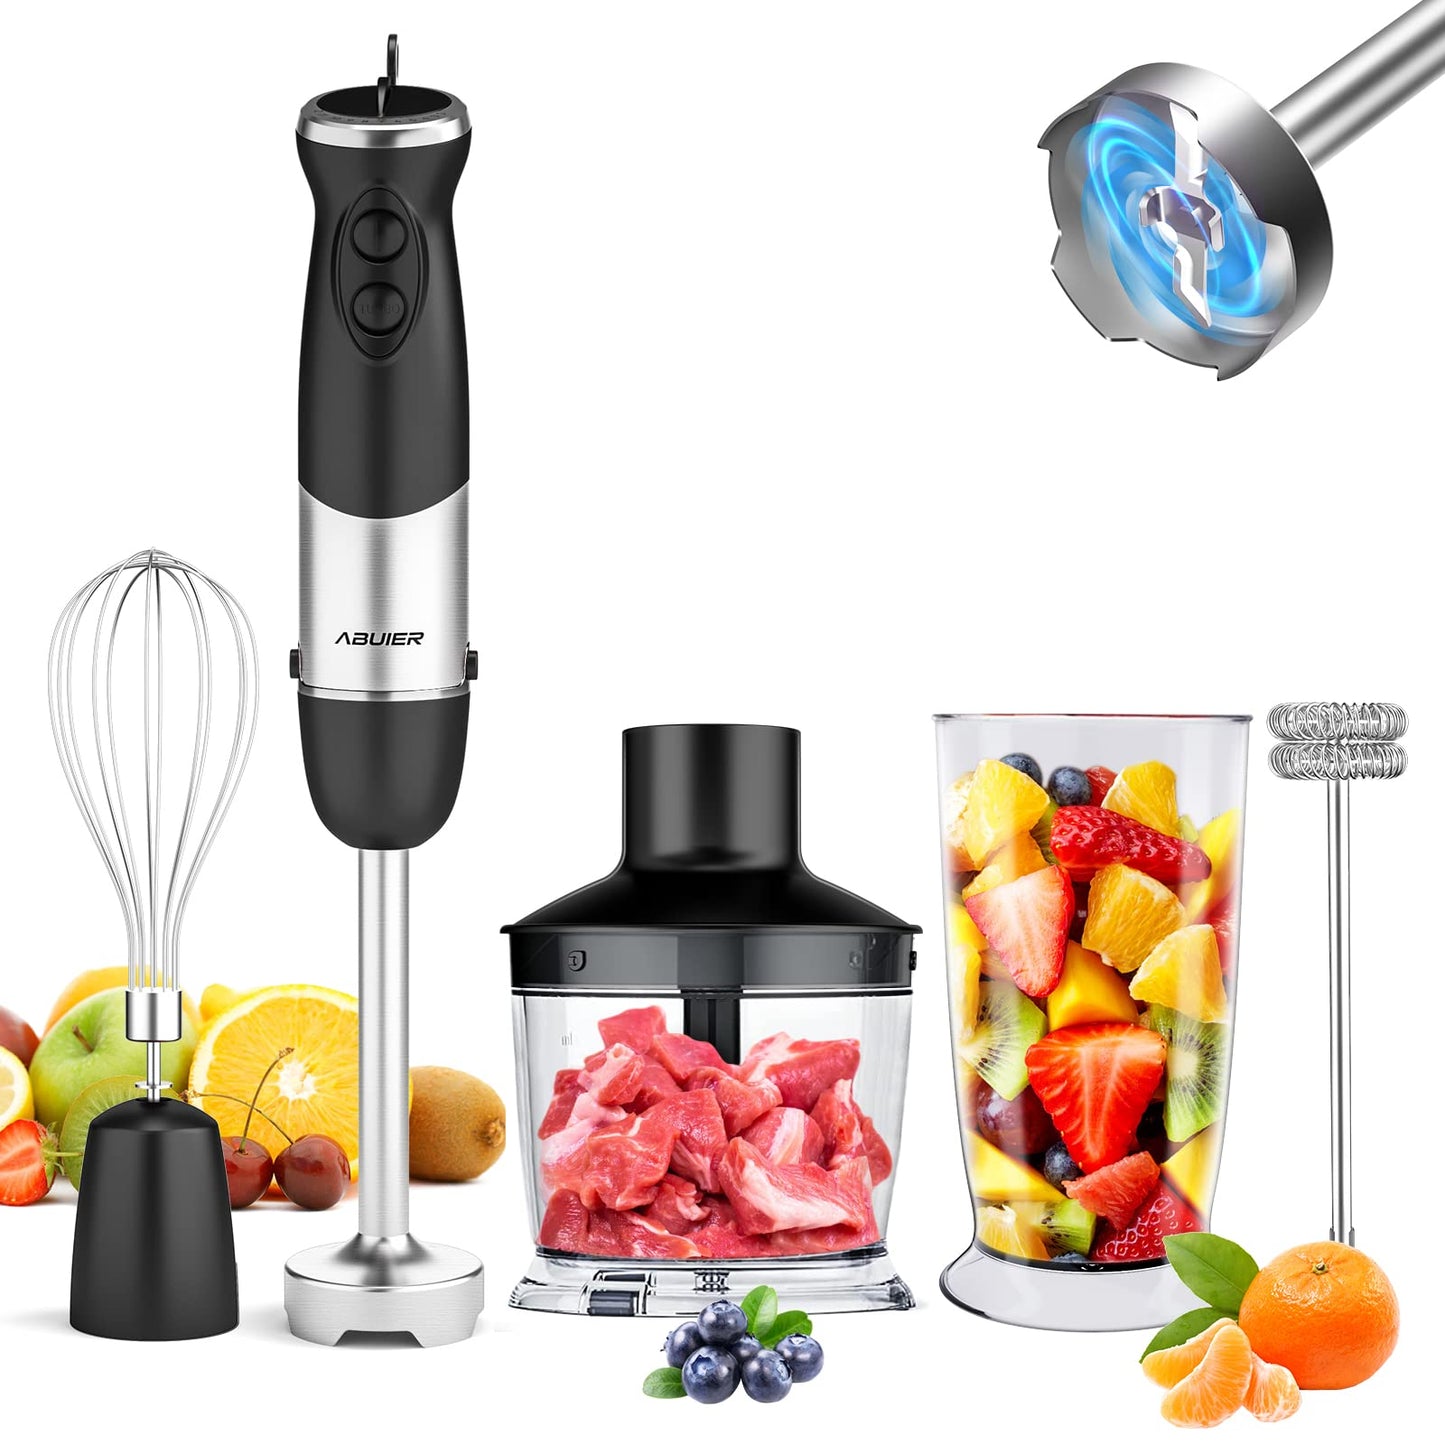 12-Cup Stainless Steel Food Processor with 3 Variable Speeds